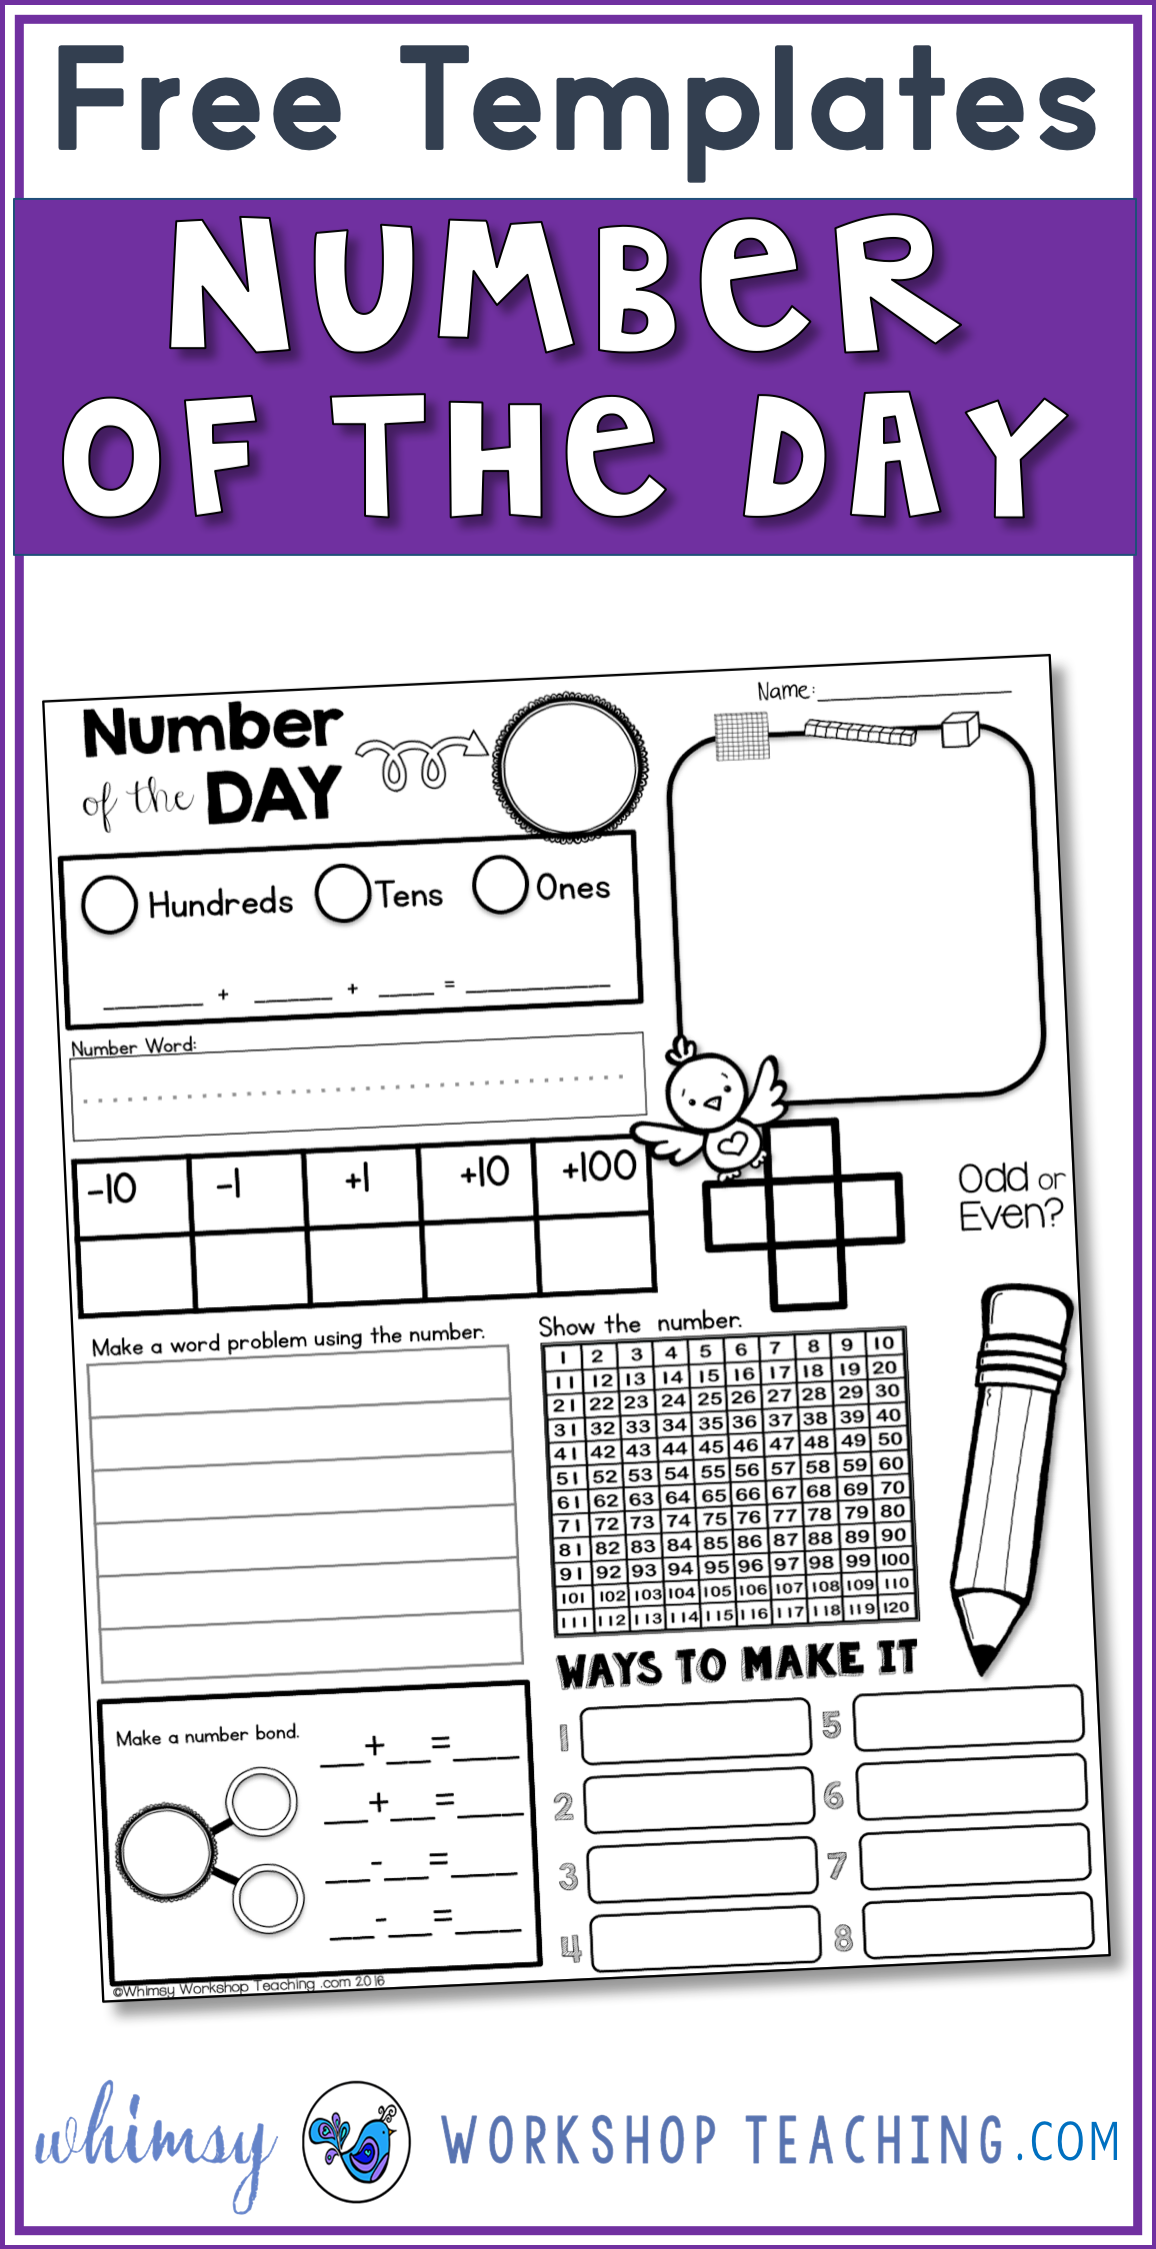 Use these free Number of the Day templates every day with a different